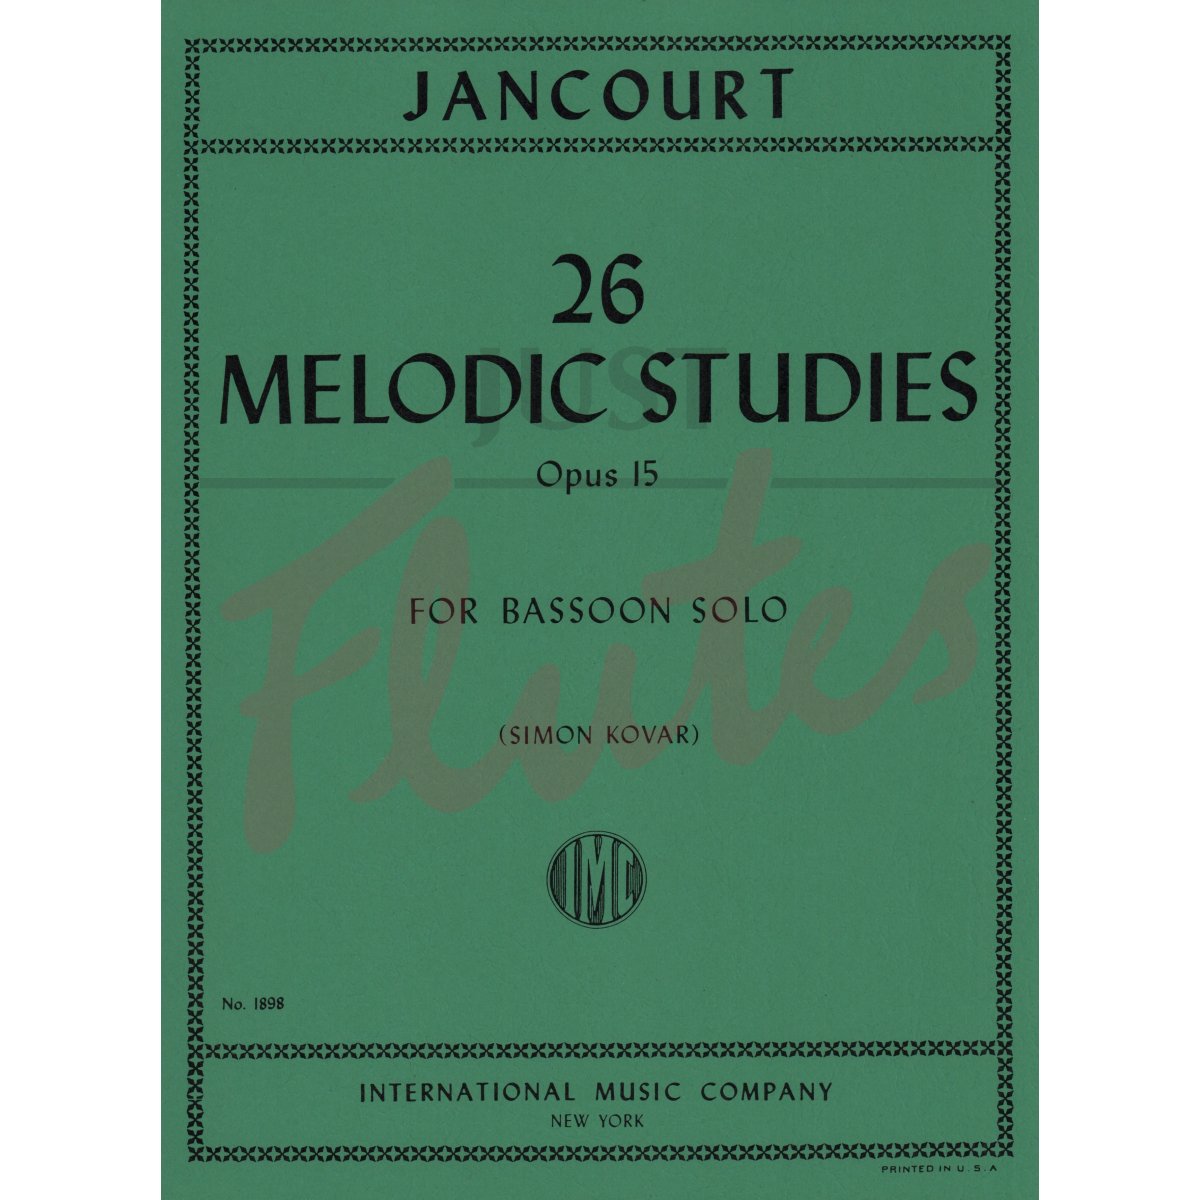 26 Melodic Studies for Bassoon